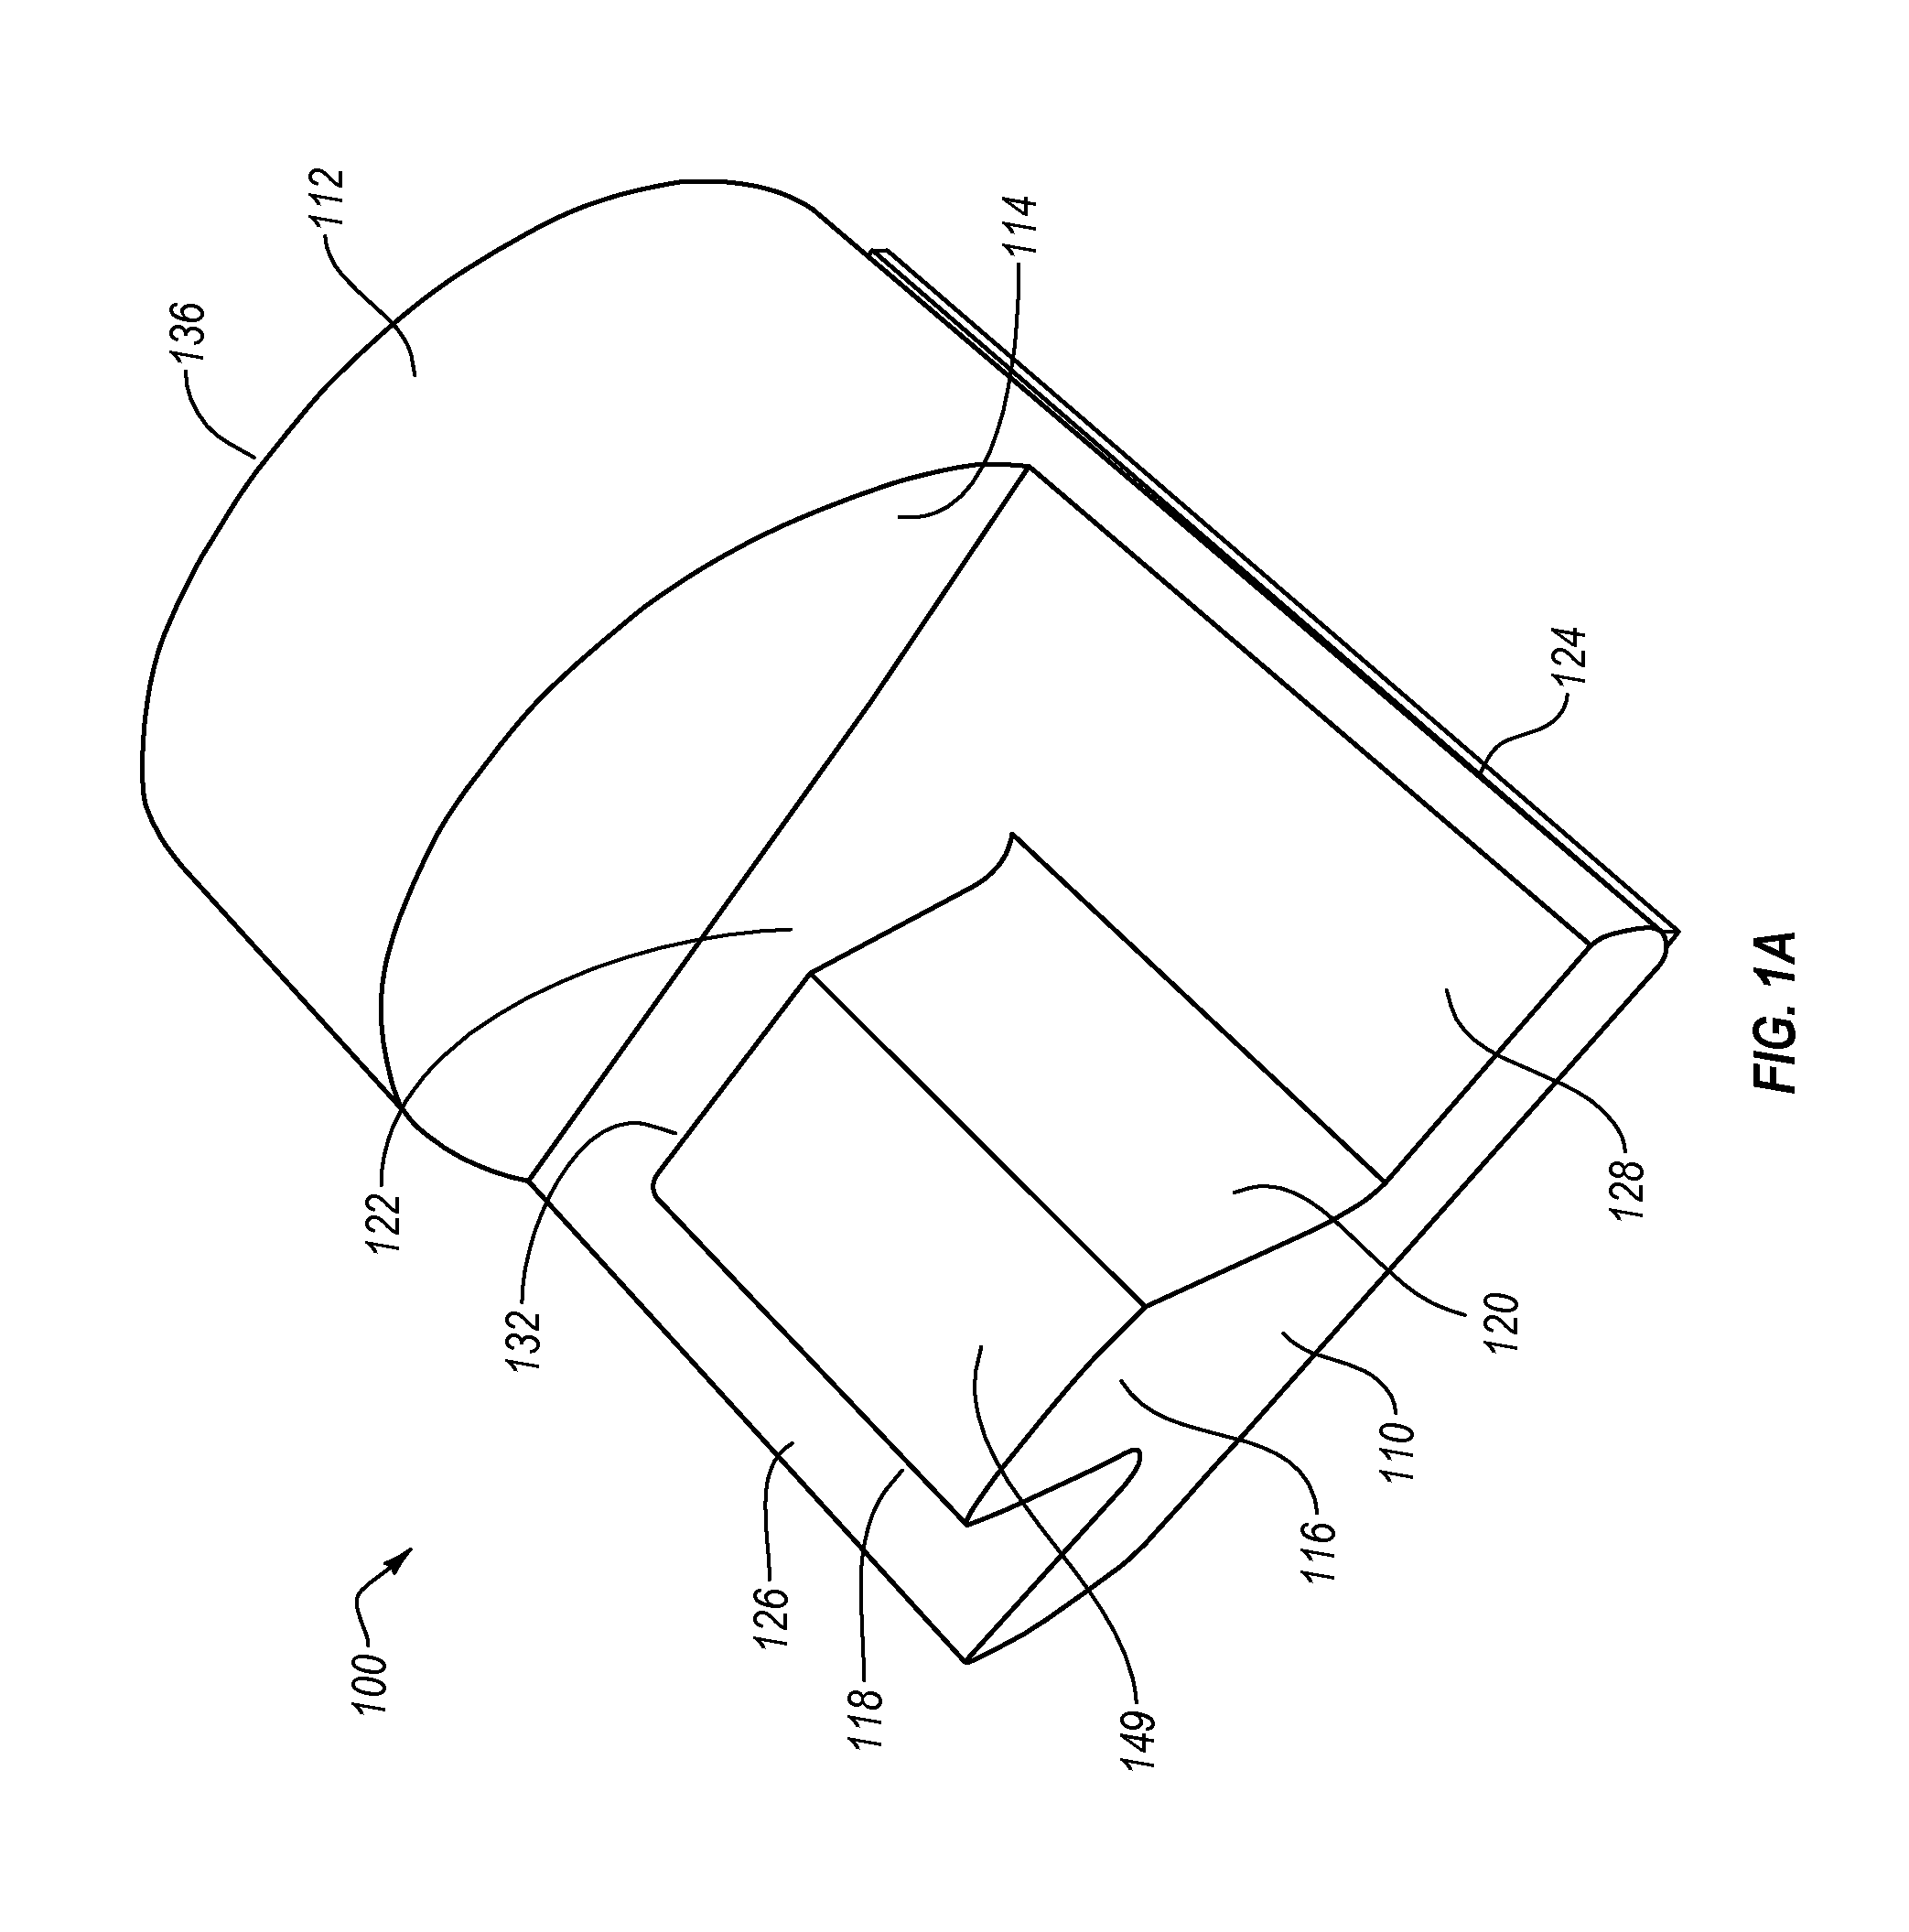 Orthopedic support and exercise device